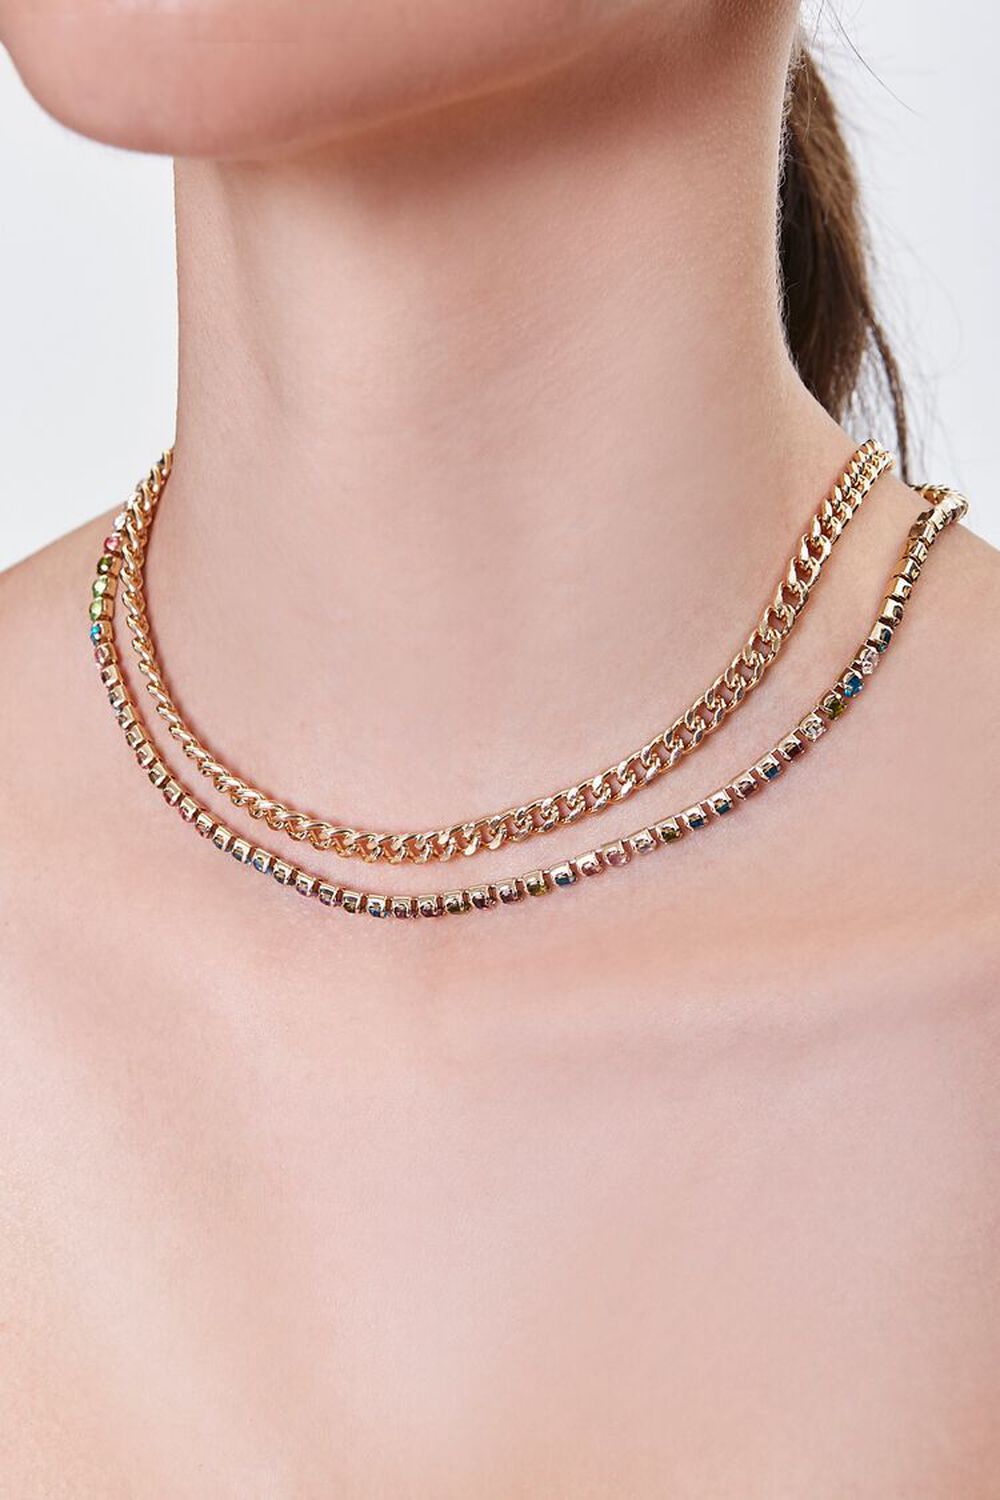 Faux Gem Chain Layered Necklace, image 1